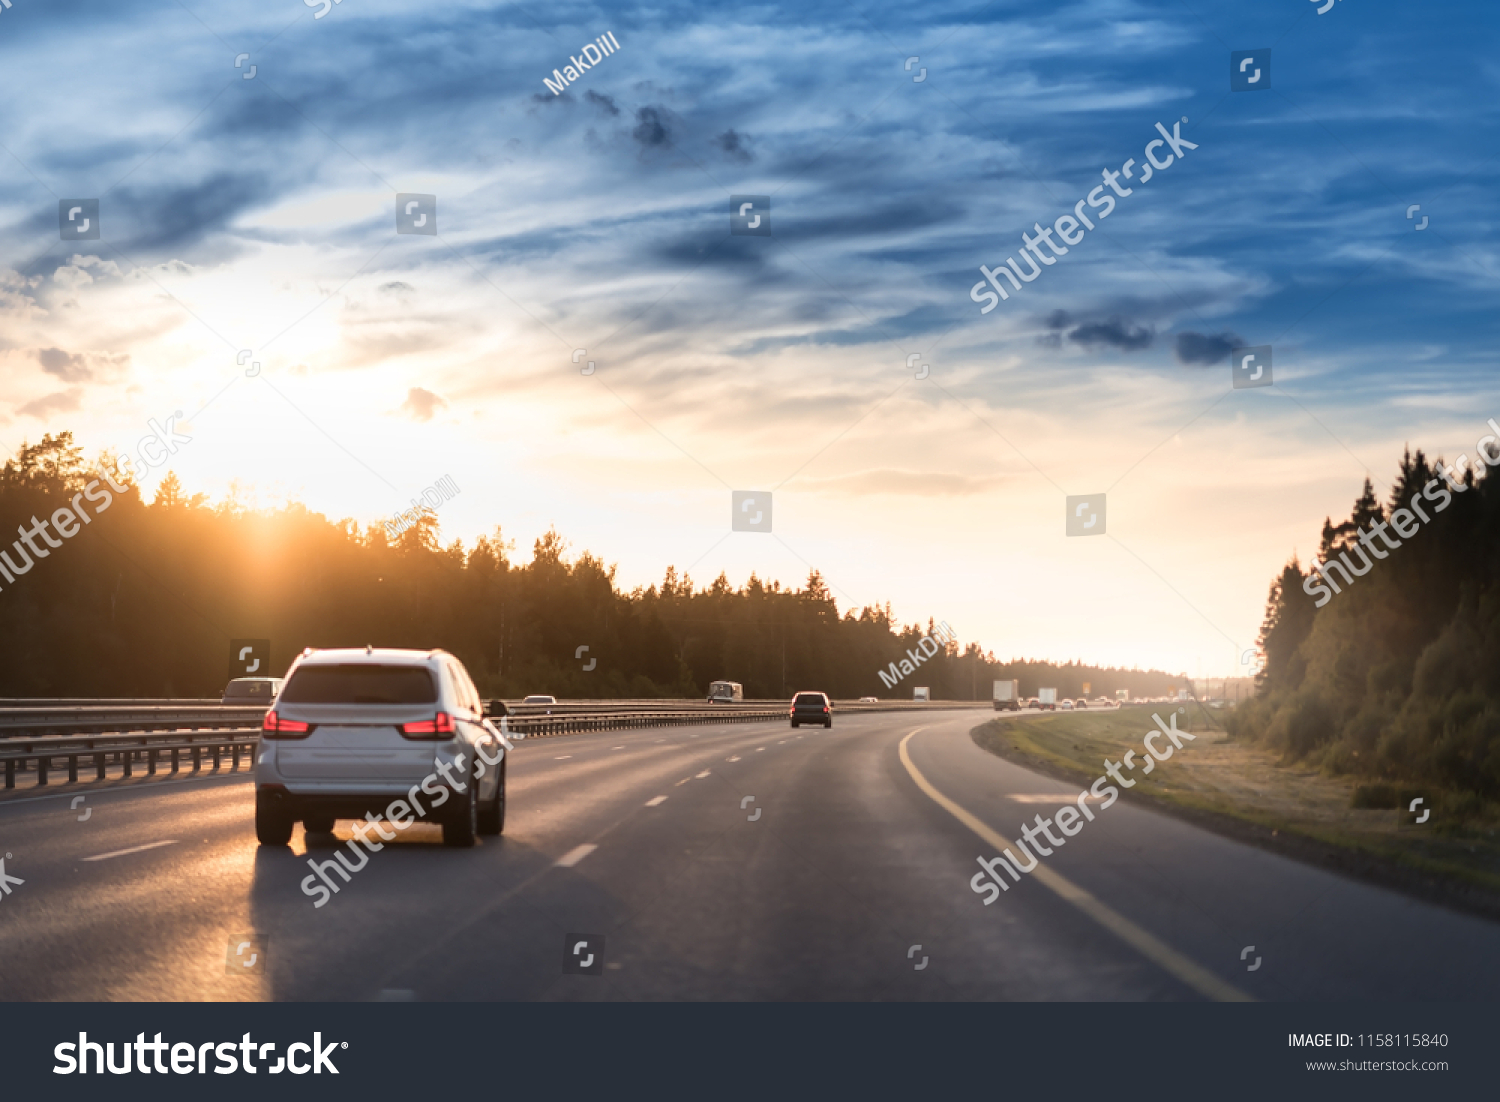 Highway traffic in sunset. Road with metal safety barrier or rail. cars on the asphalt under the cloudy sky. #1158115840